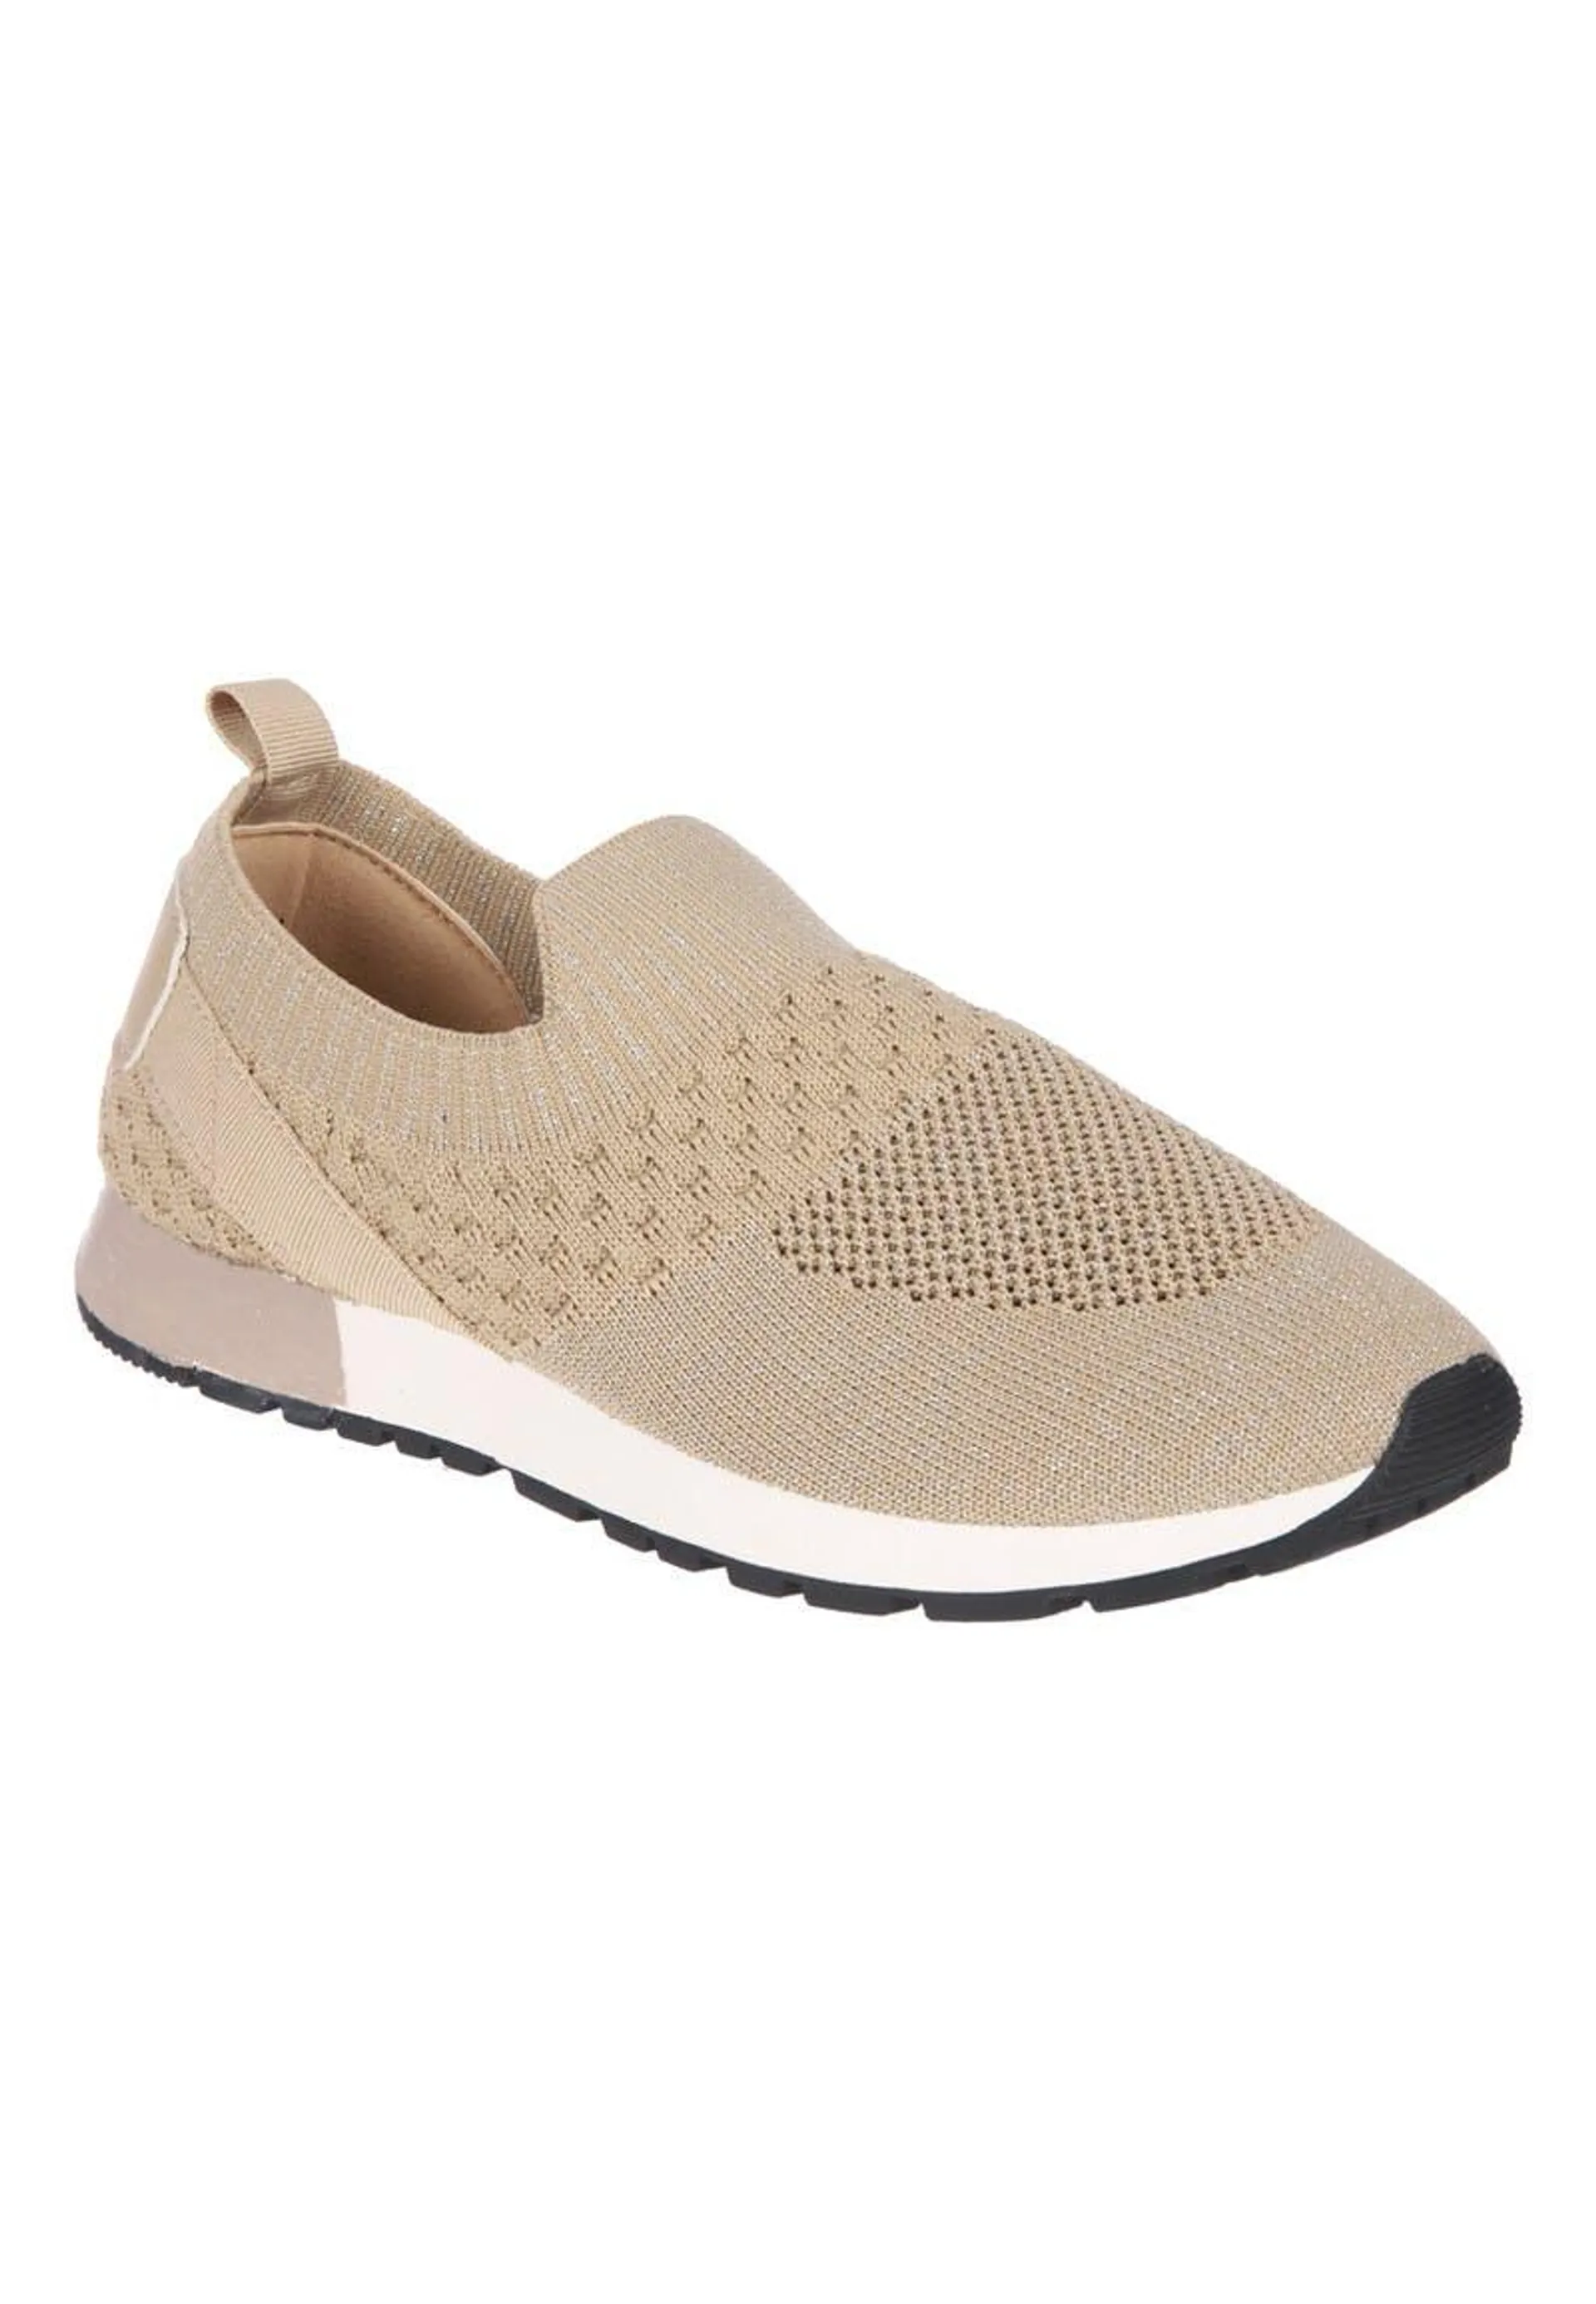 Womens Gold Slip-On Casual Trainers